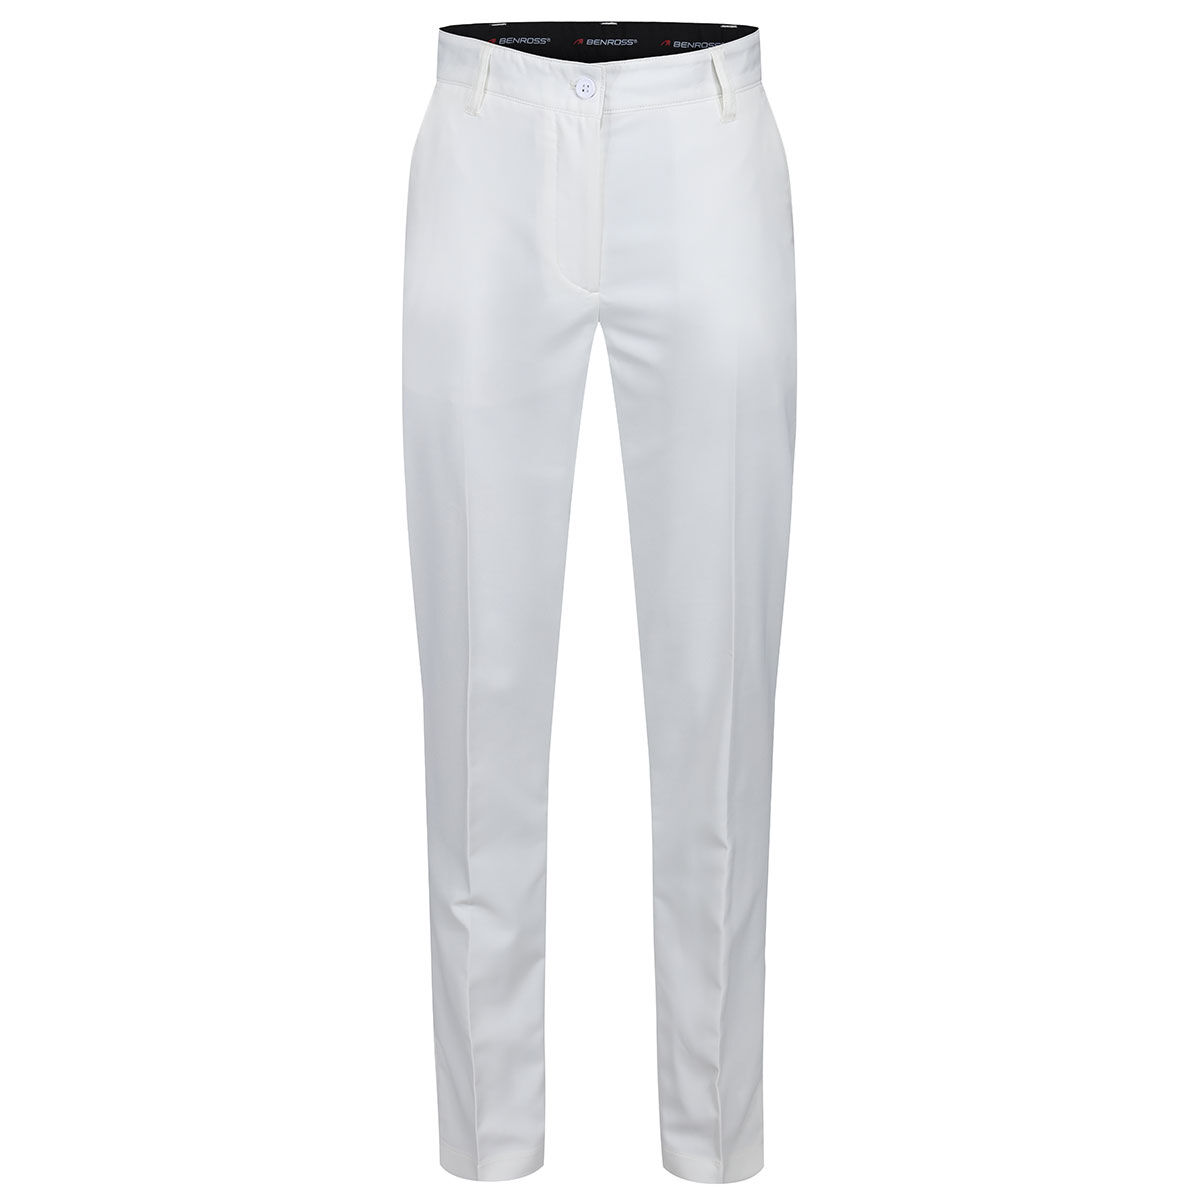 Dwyers  Co Fleece Lined Water Resistant Golf Trousers  Trousers from  County Golf  Golf Sale  Go